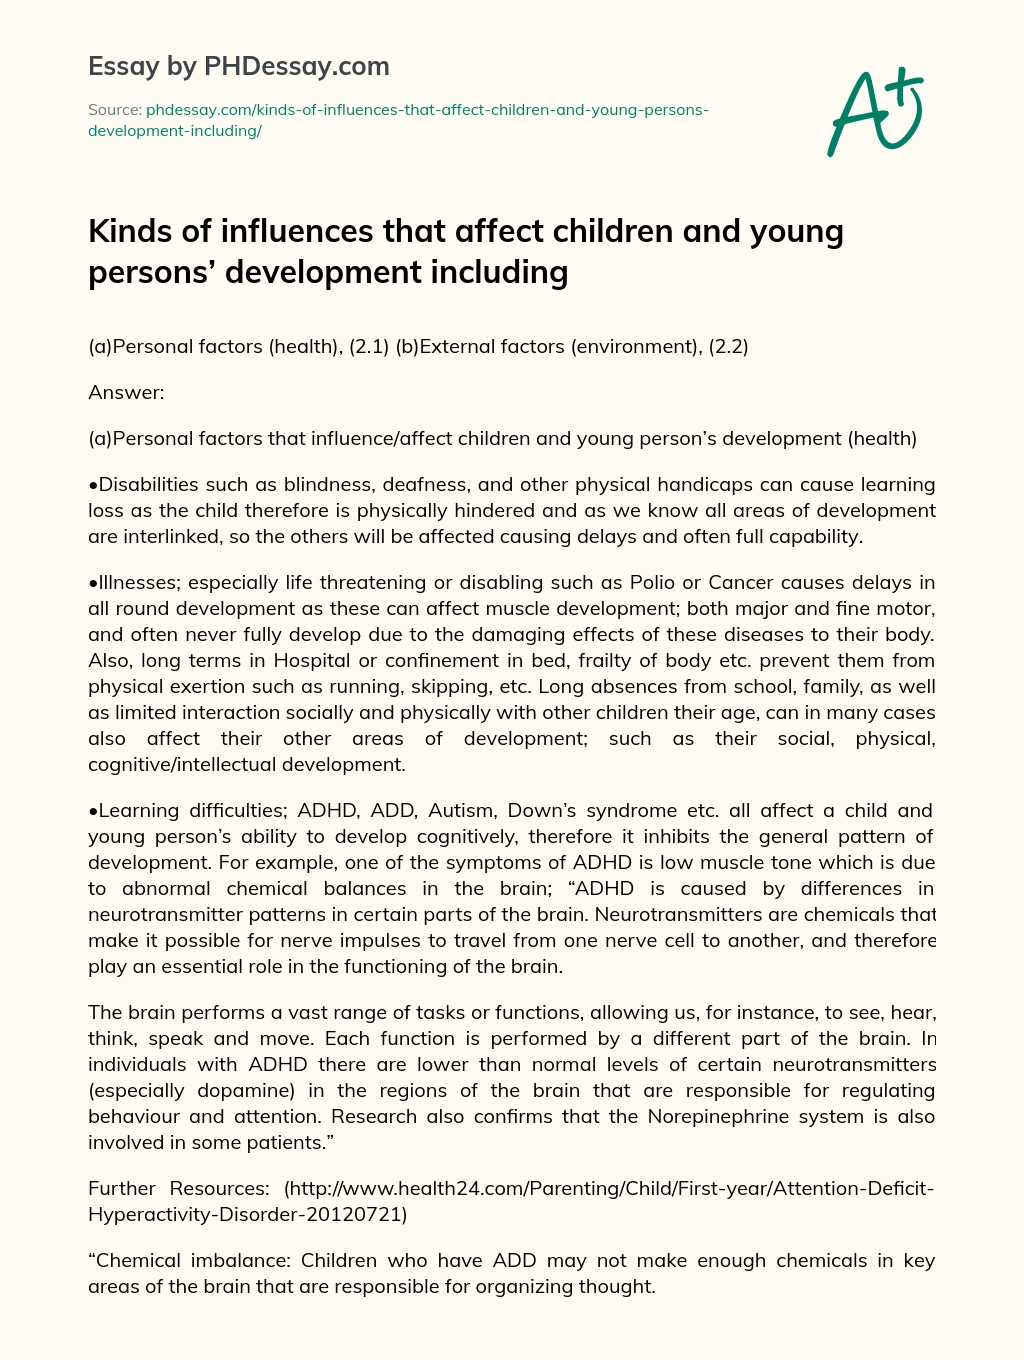 Kinds of influences that affect children and young persons’ development including essay